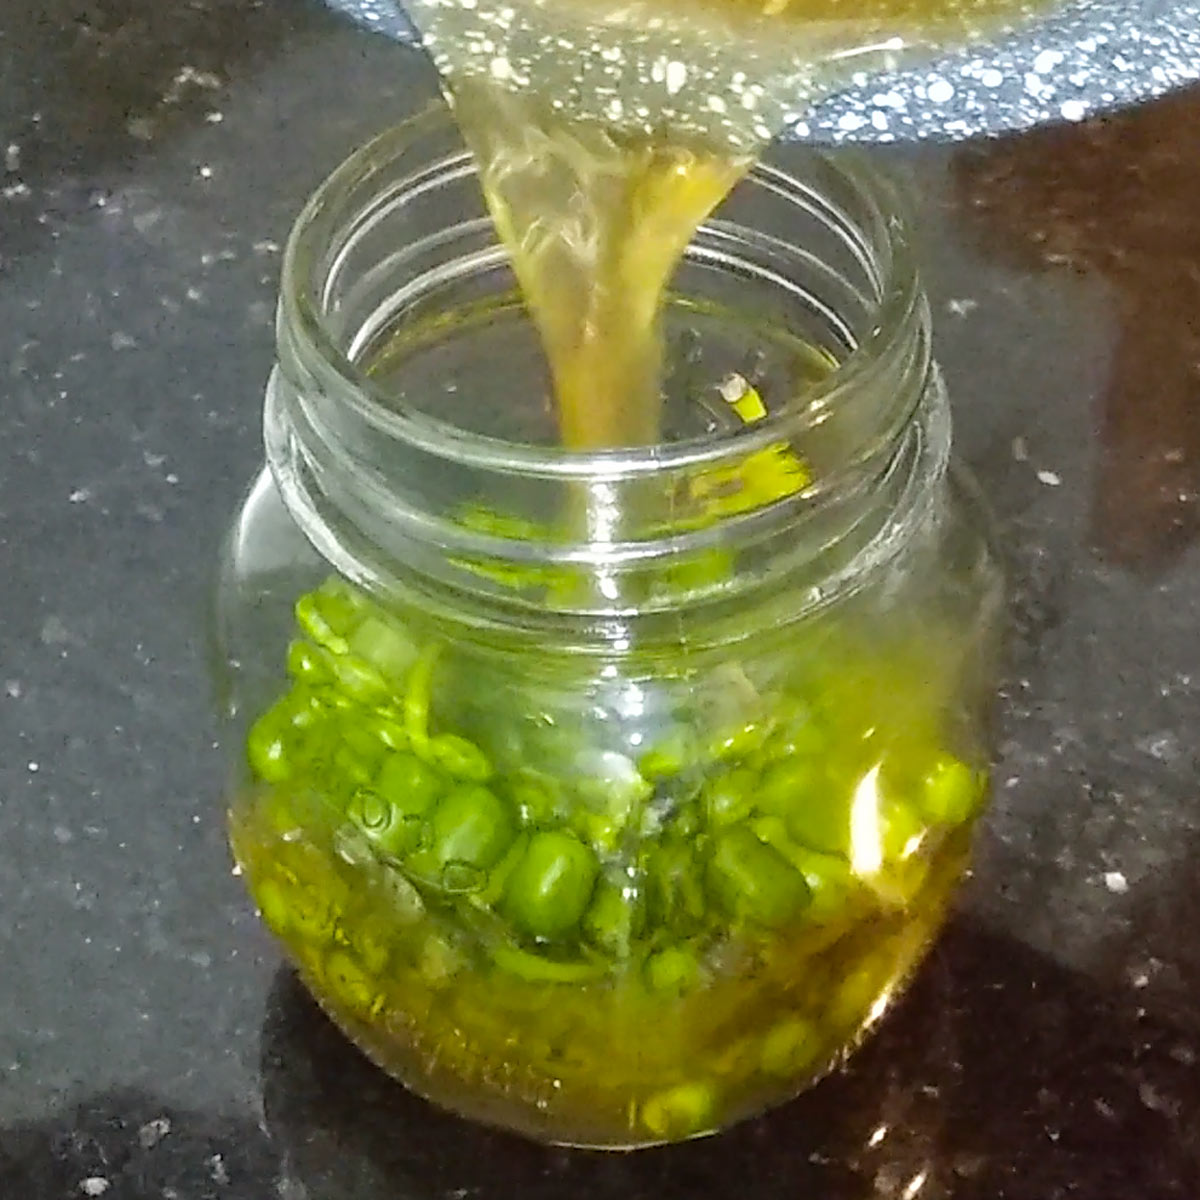 pour homemade brine over peppercorn in the jar